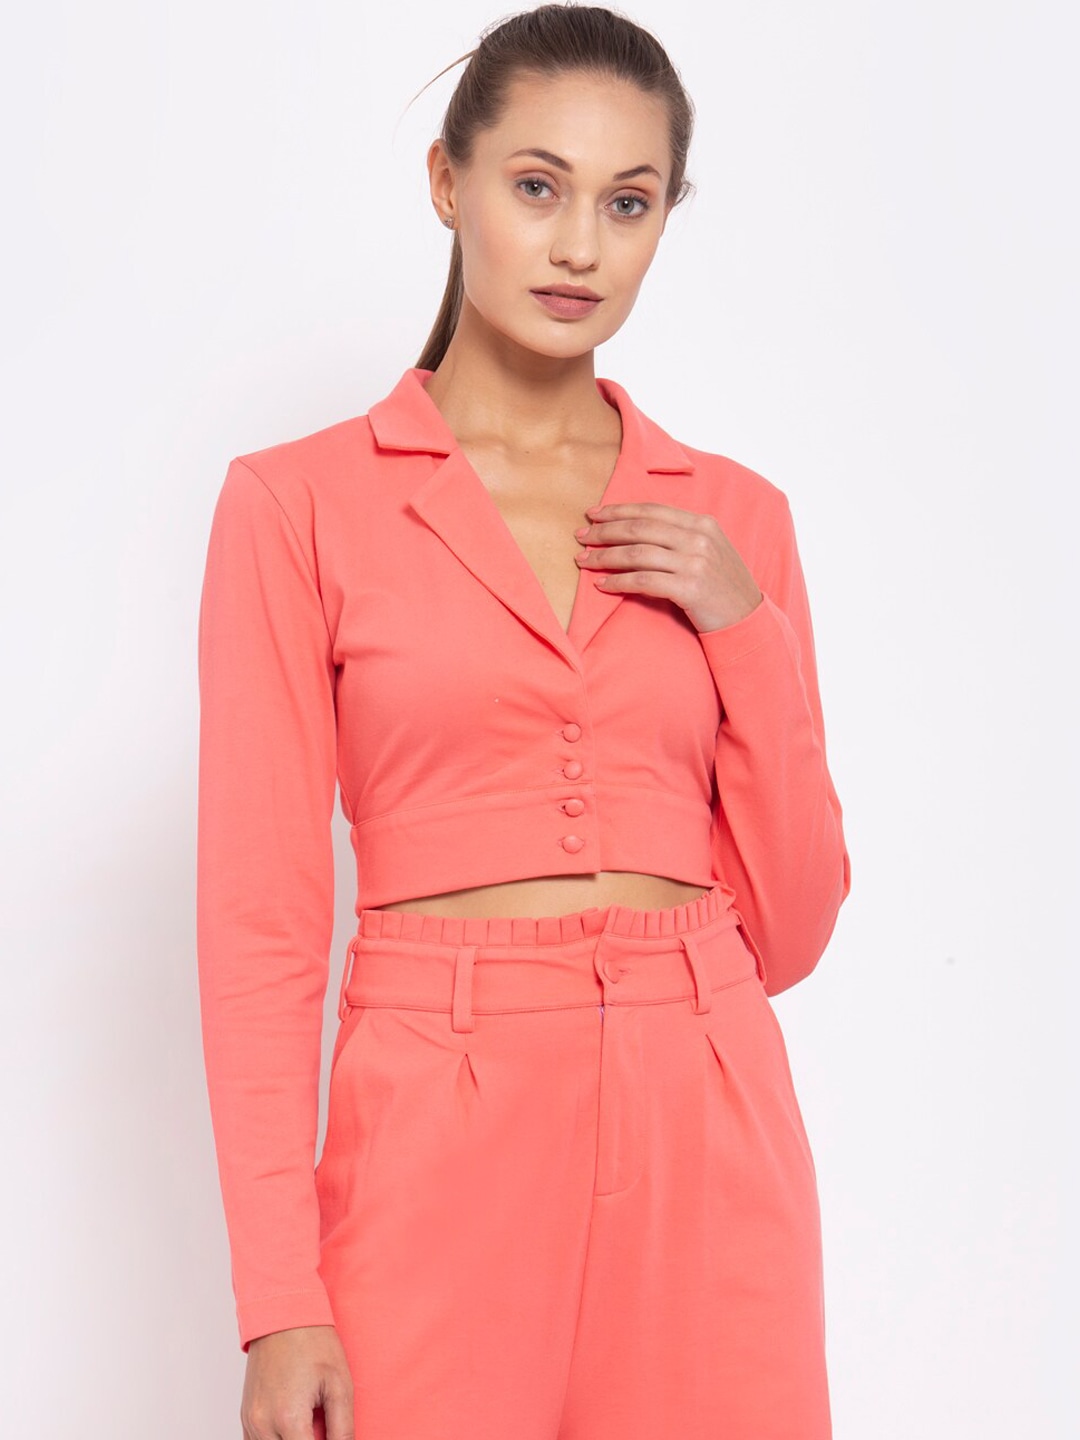 Clothing Blazers | YOONOY Women Peach-Coloured Solid Pure Cotton Single-Breasted Blazer - JR30483